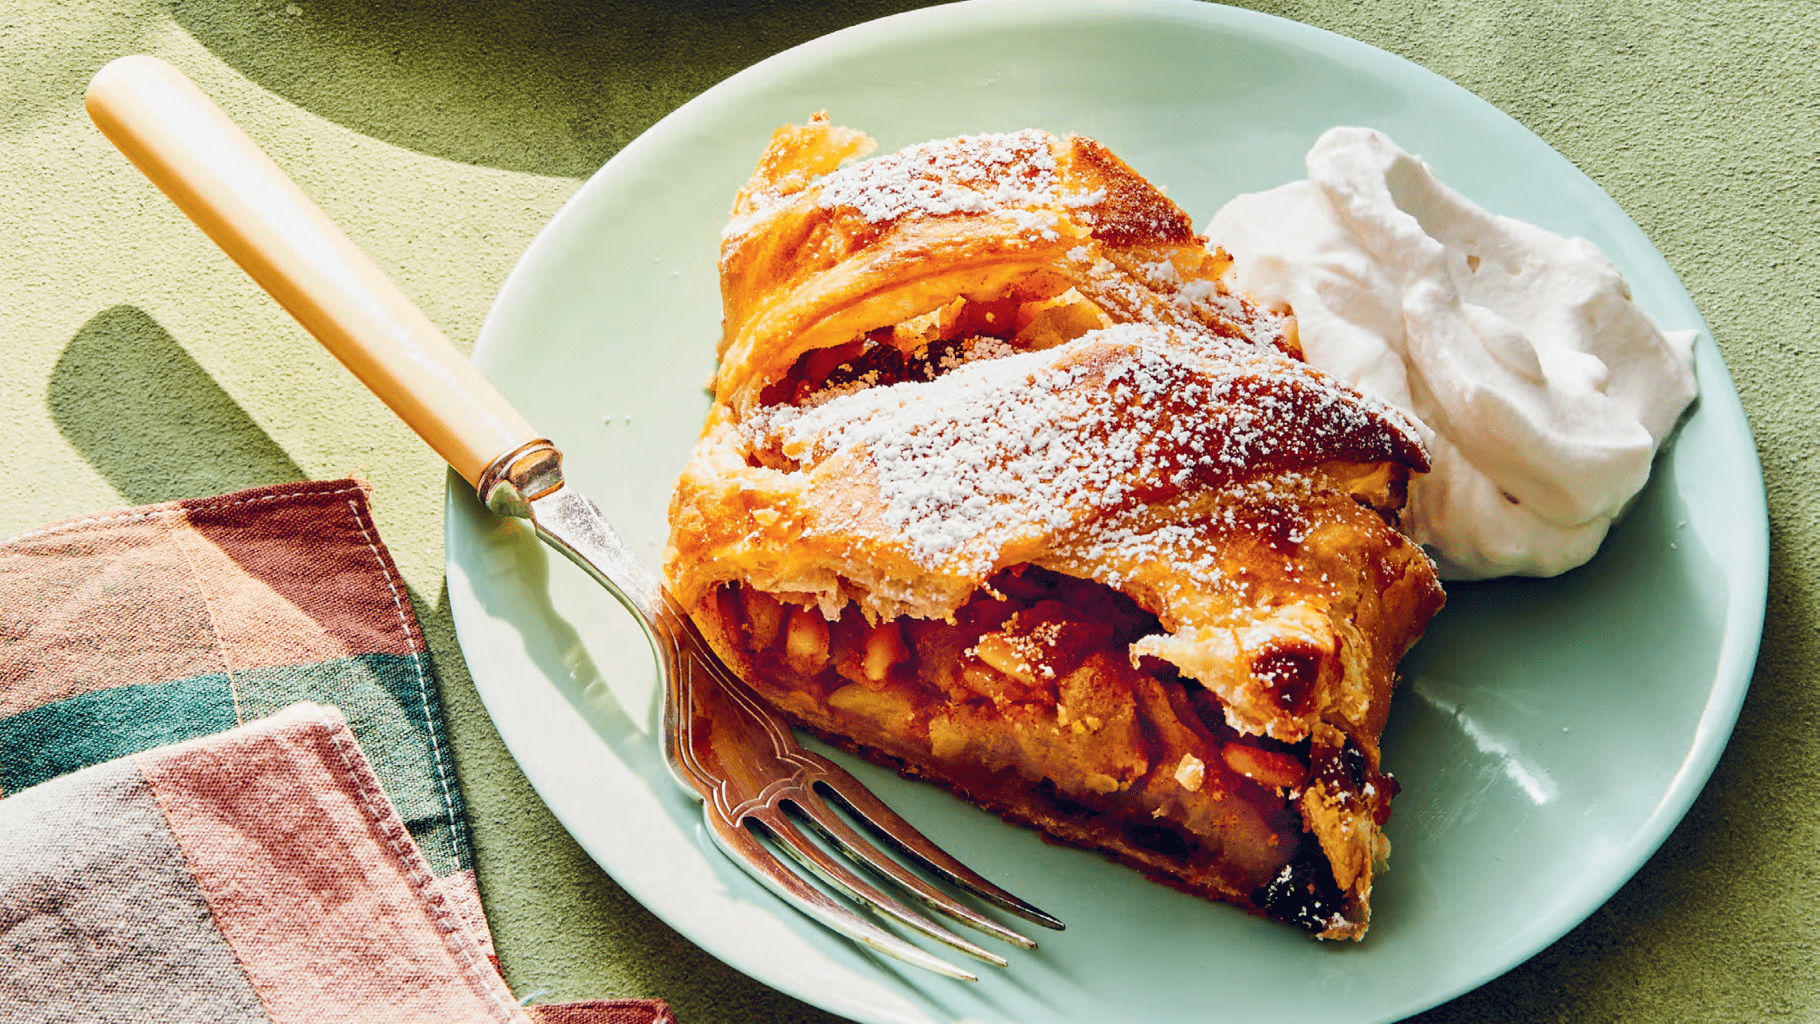 Strudel di Mele excerpted from Italian Snacking by Anna Francese Gass.